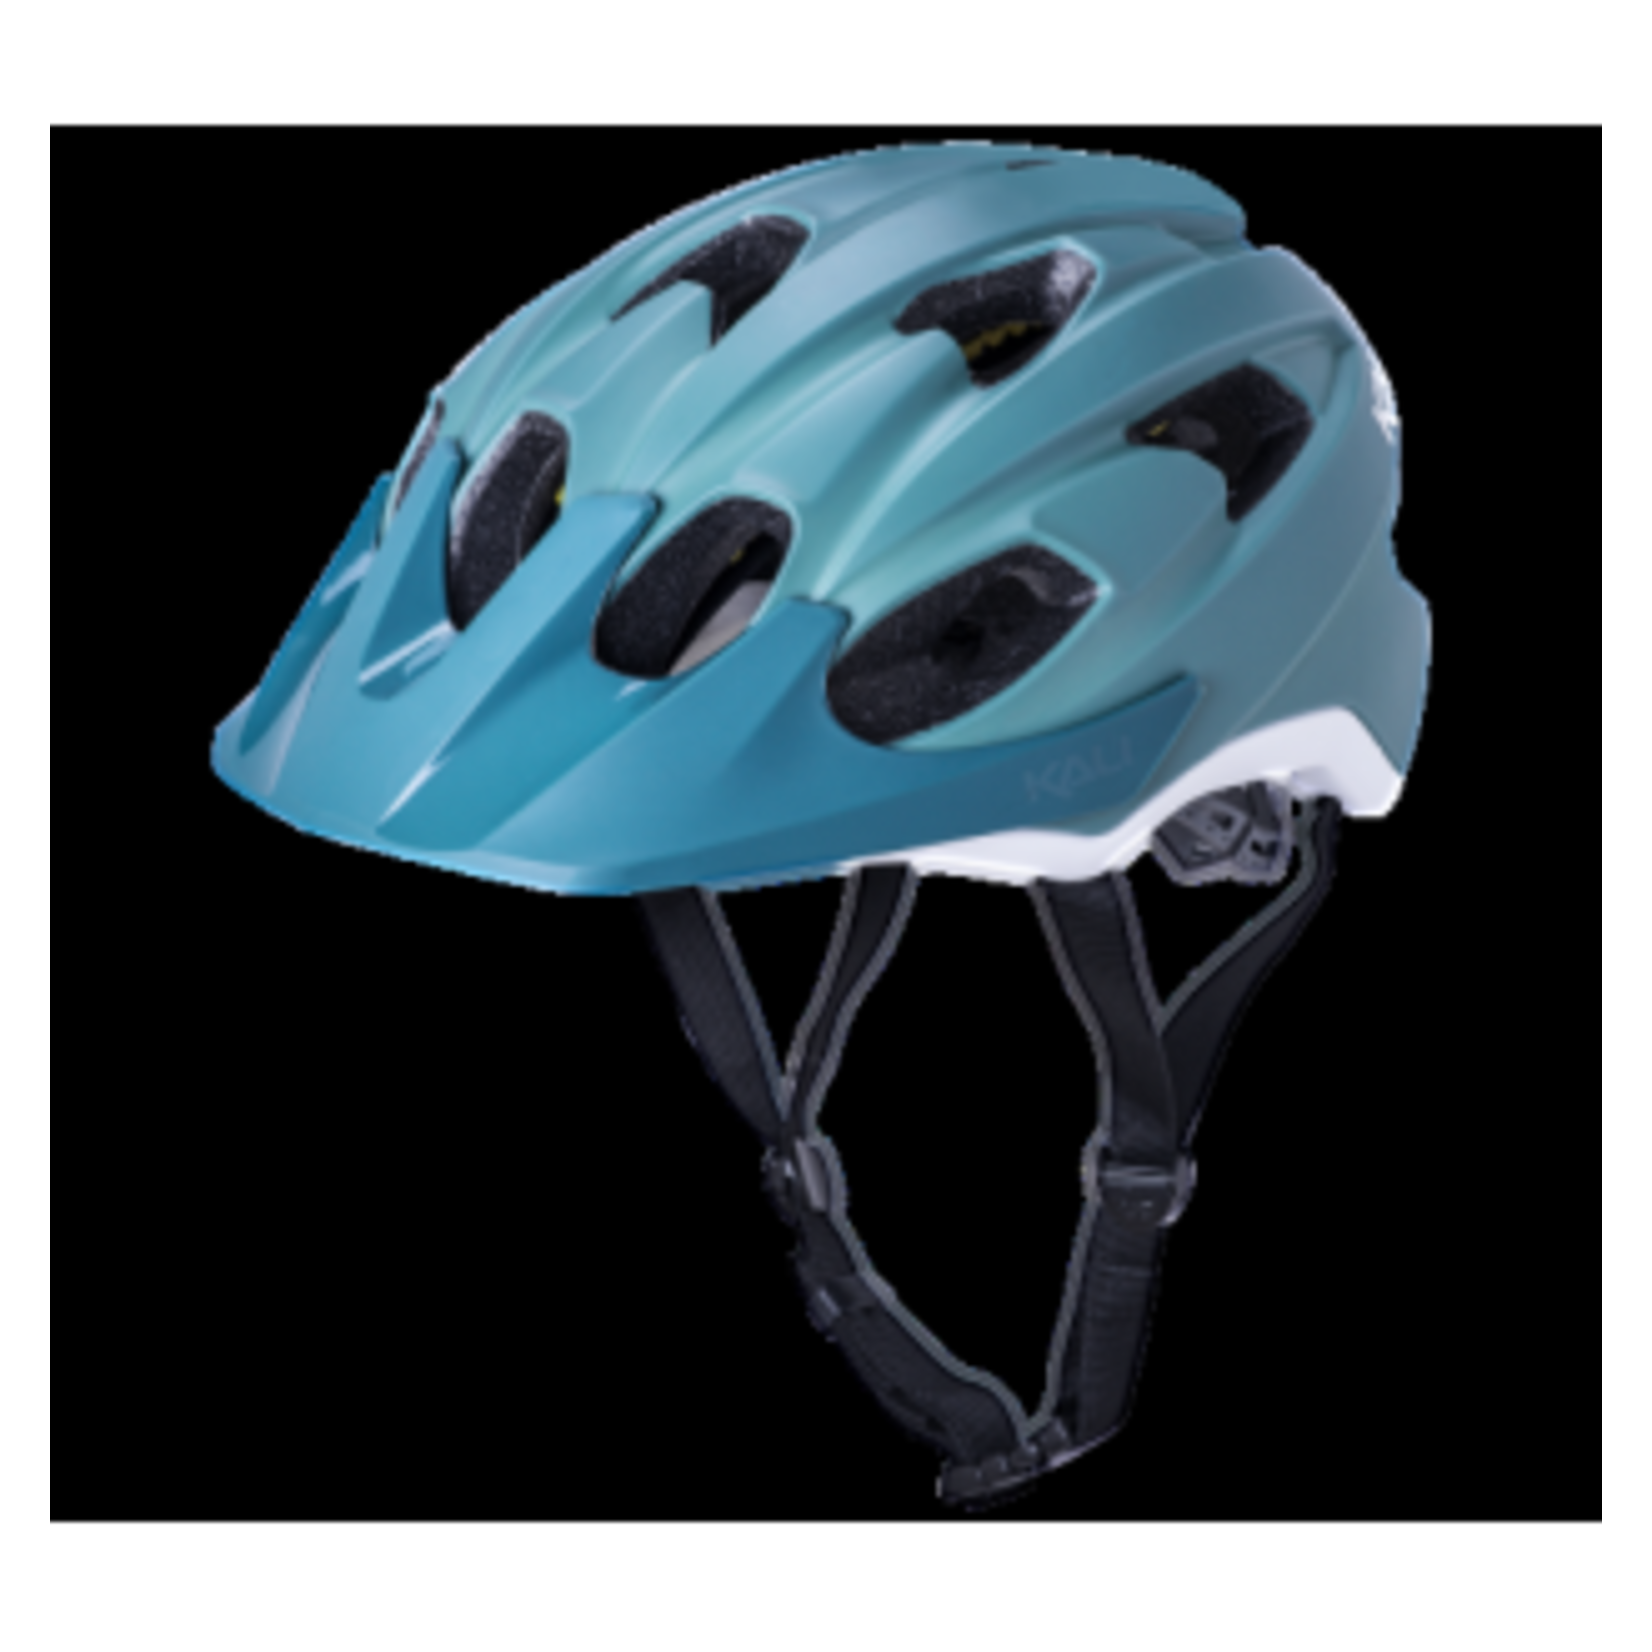 Kali Protectives Pace Trail Helmet Solid Matte Moss/White S/M